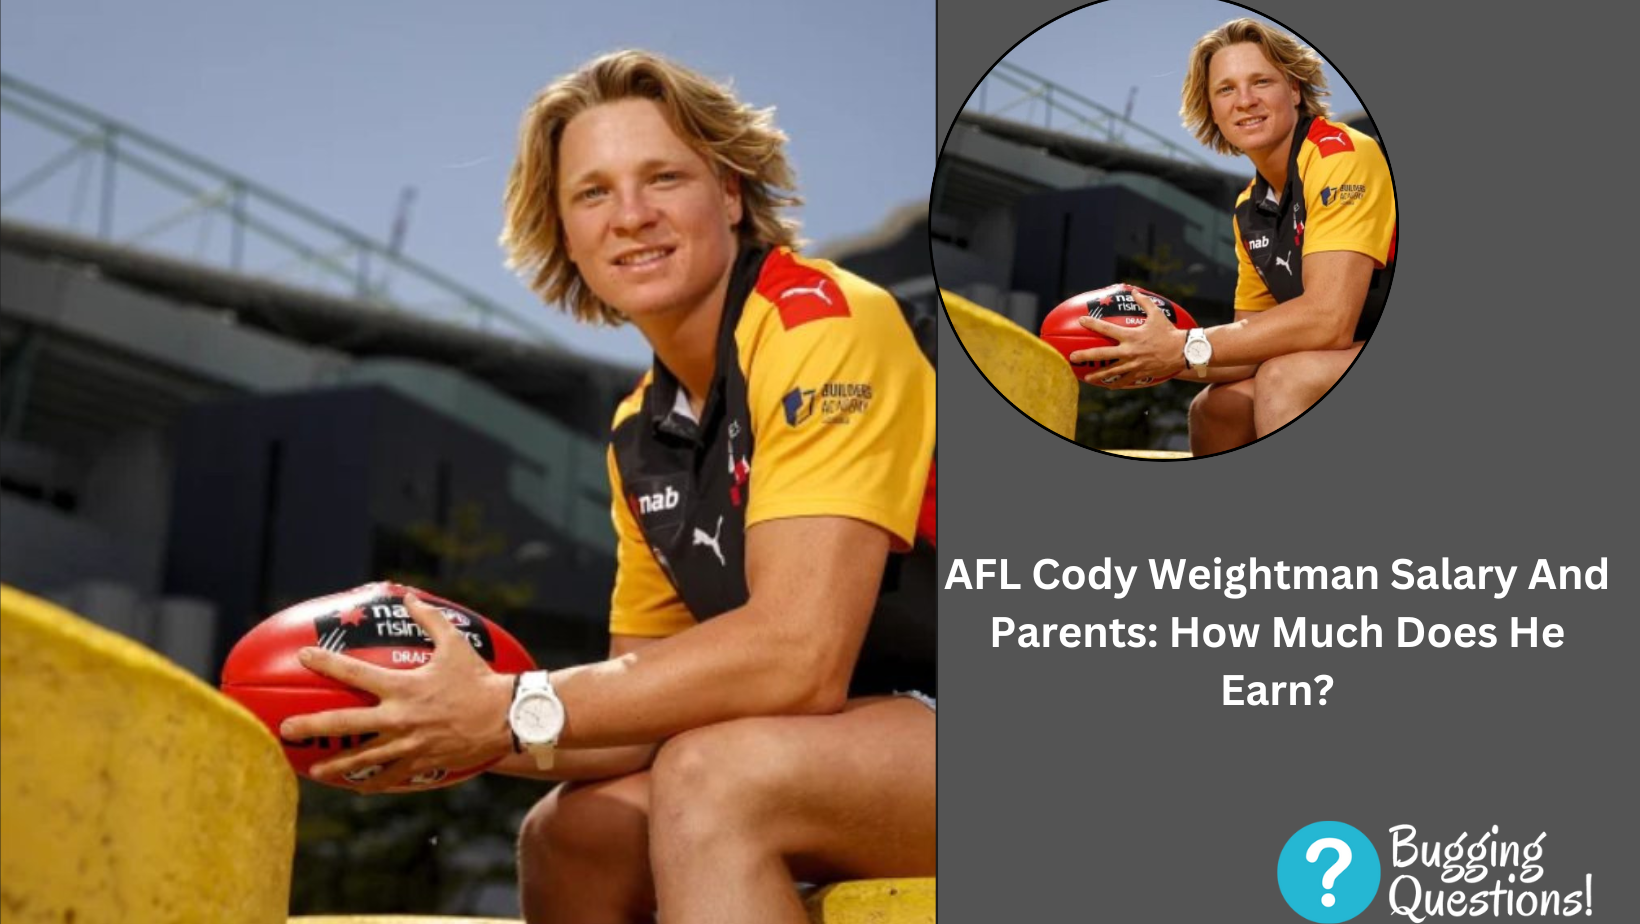 AFL Cody Weightman Salary And Parents